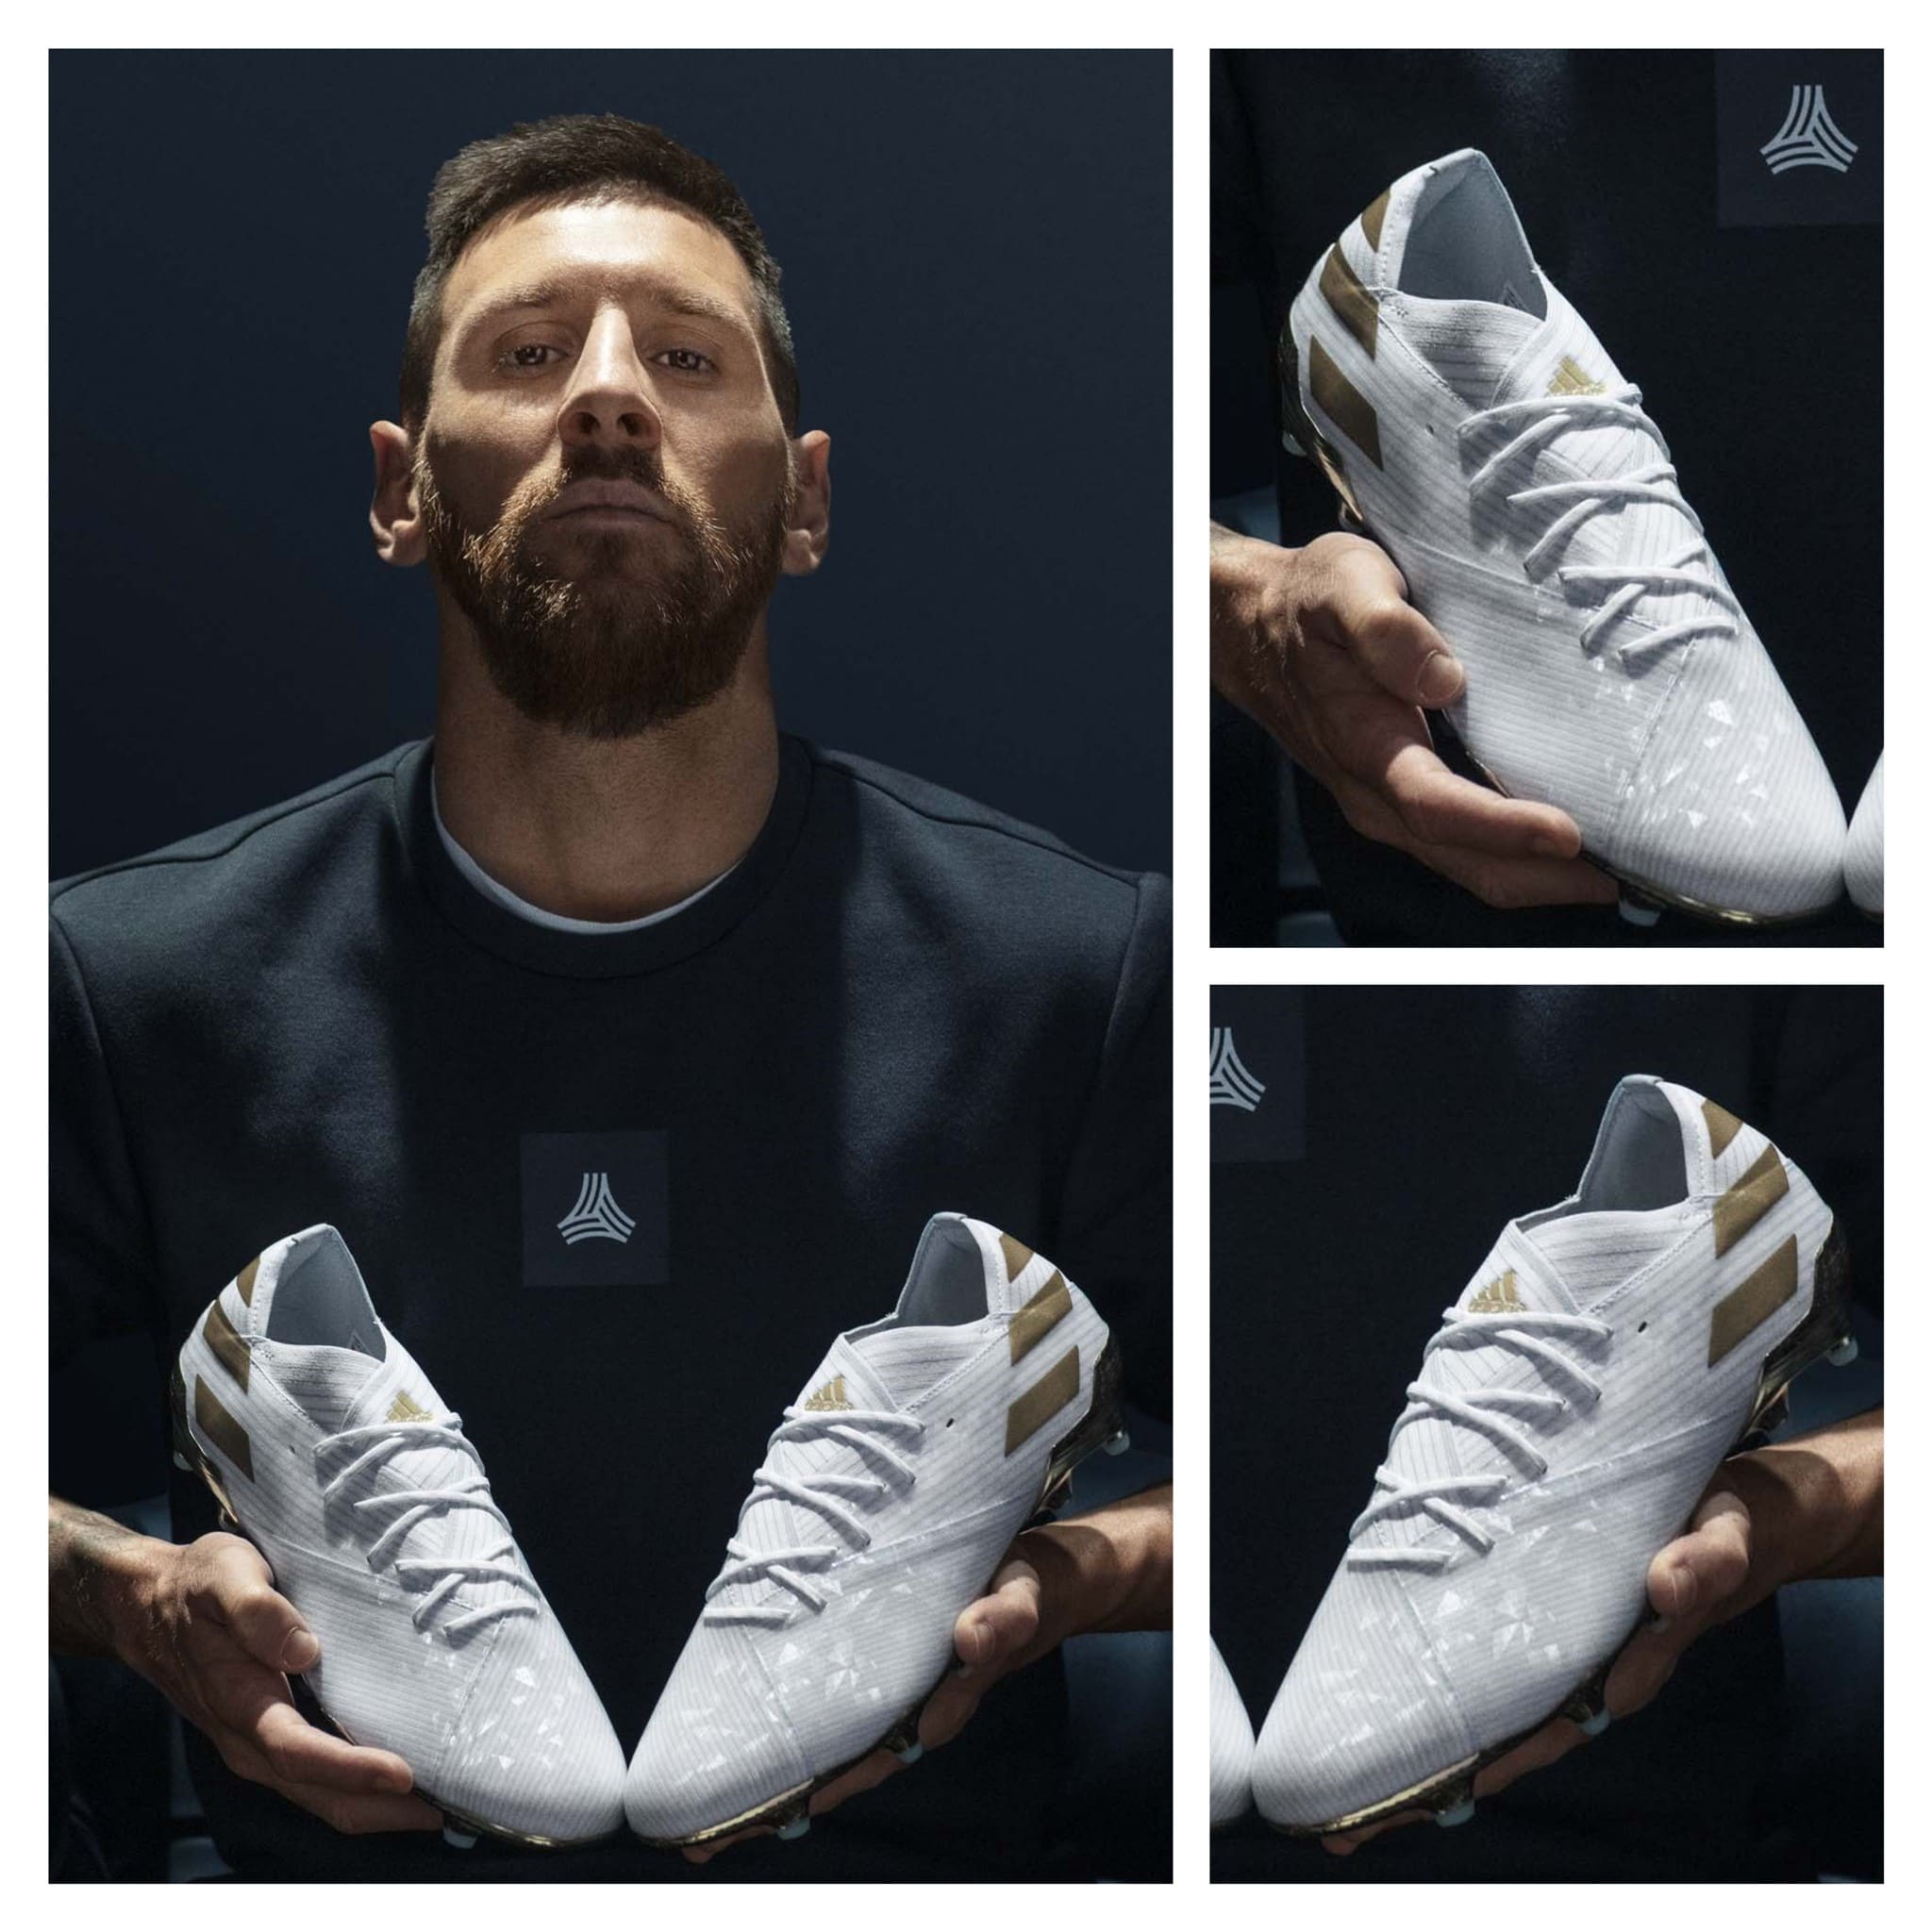 What Football Boots are Lionel Messi Wearing? - Boot History - Nemeziz 15